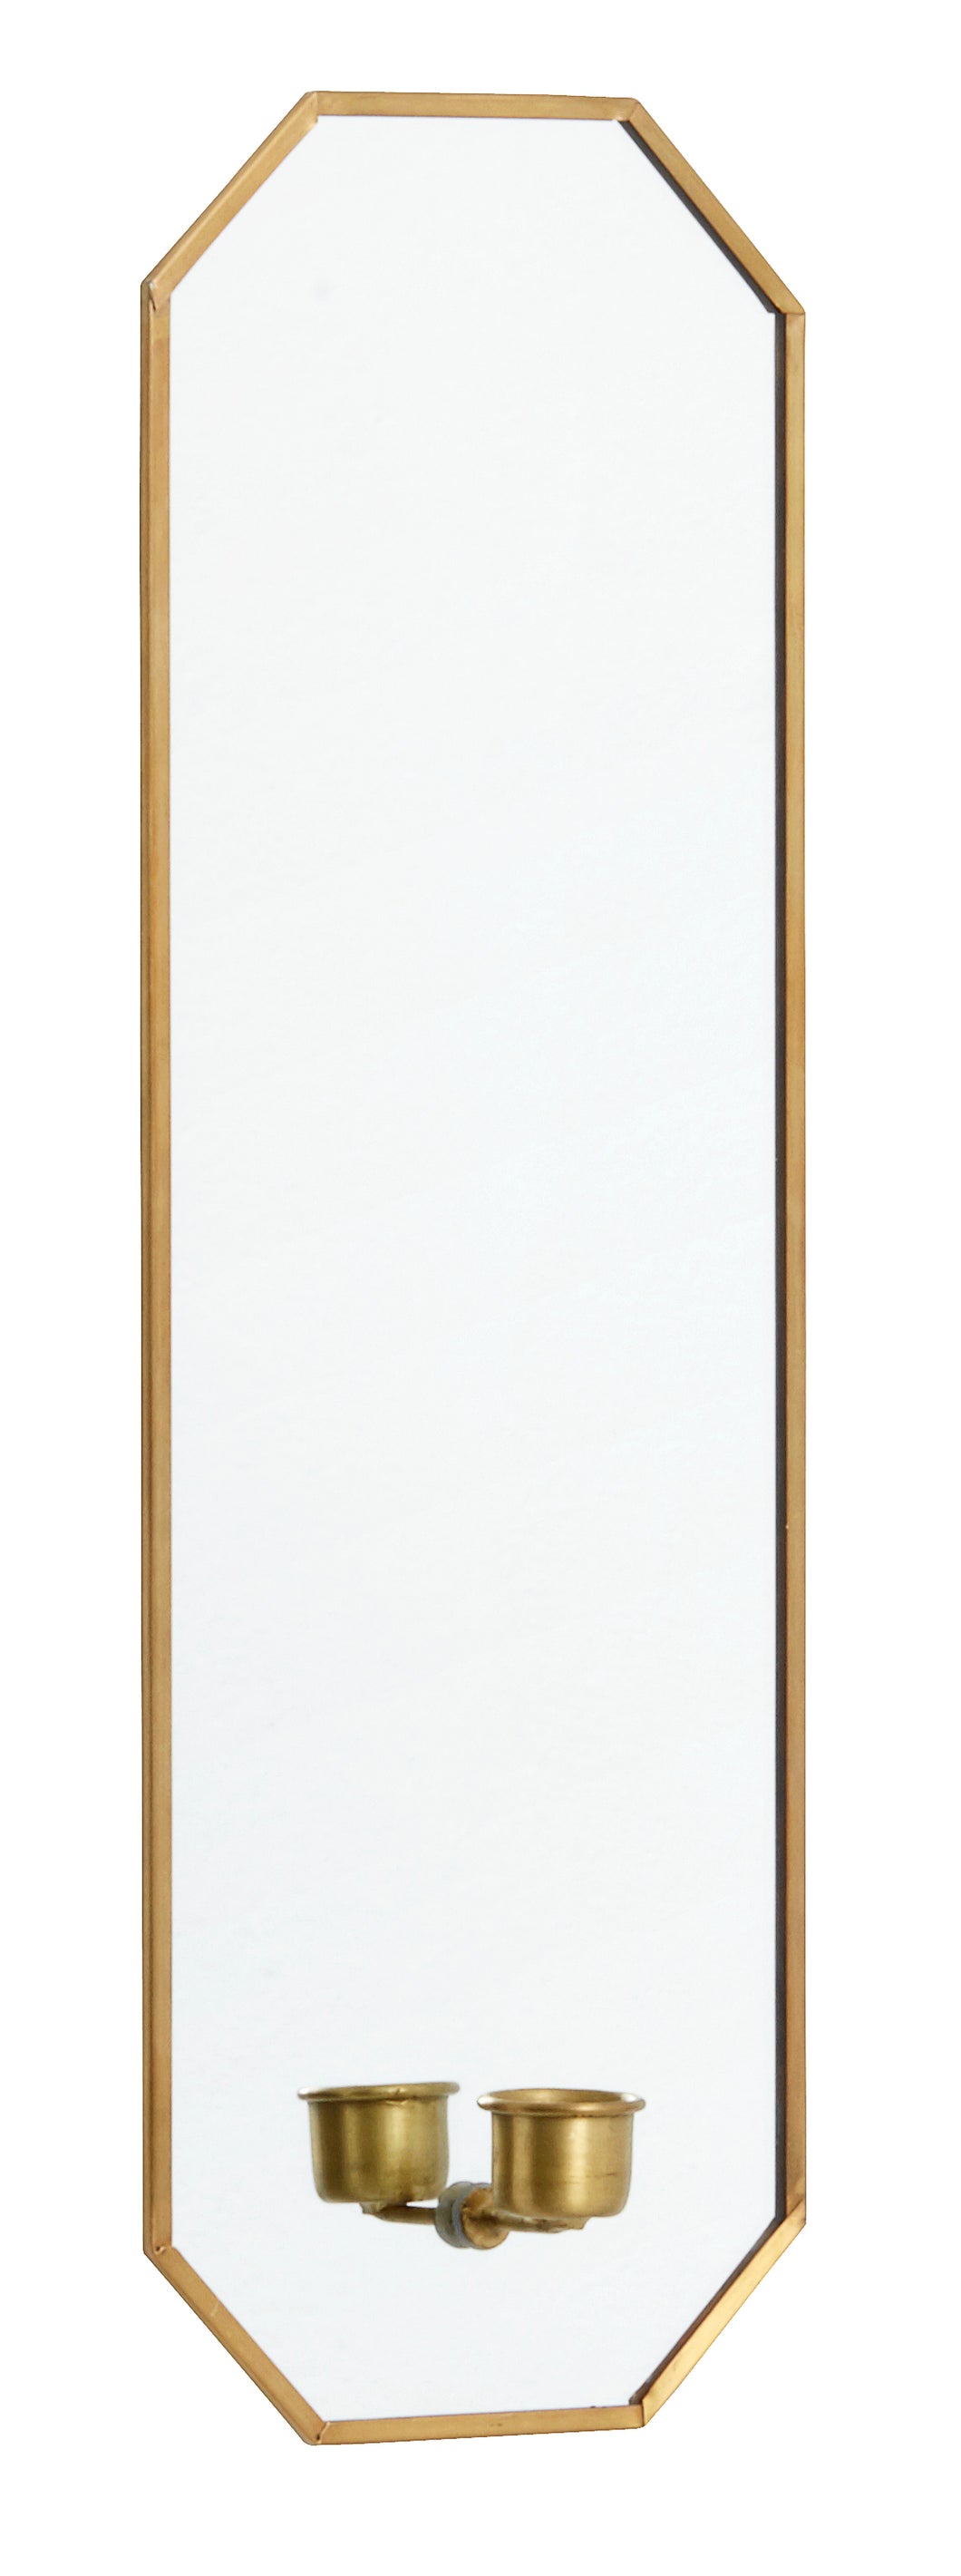 Gold Mirror with Candle Holder